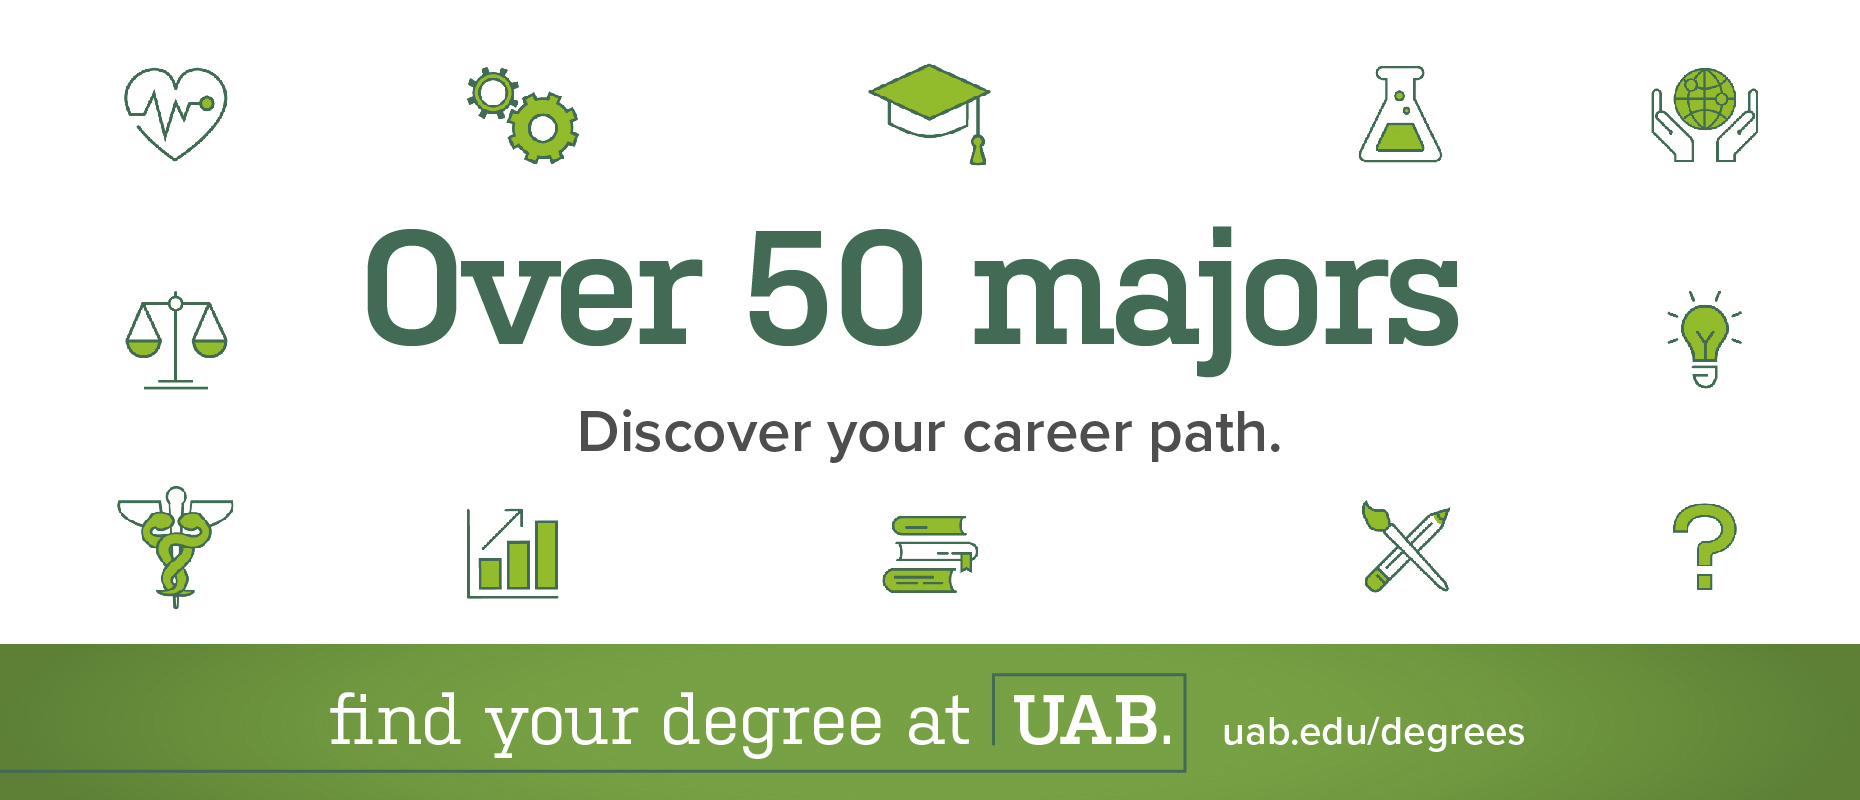 Over 50 majors. Discover your career path. Find your degree at UAB.